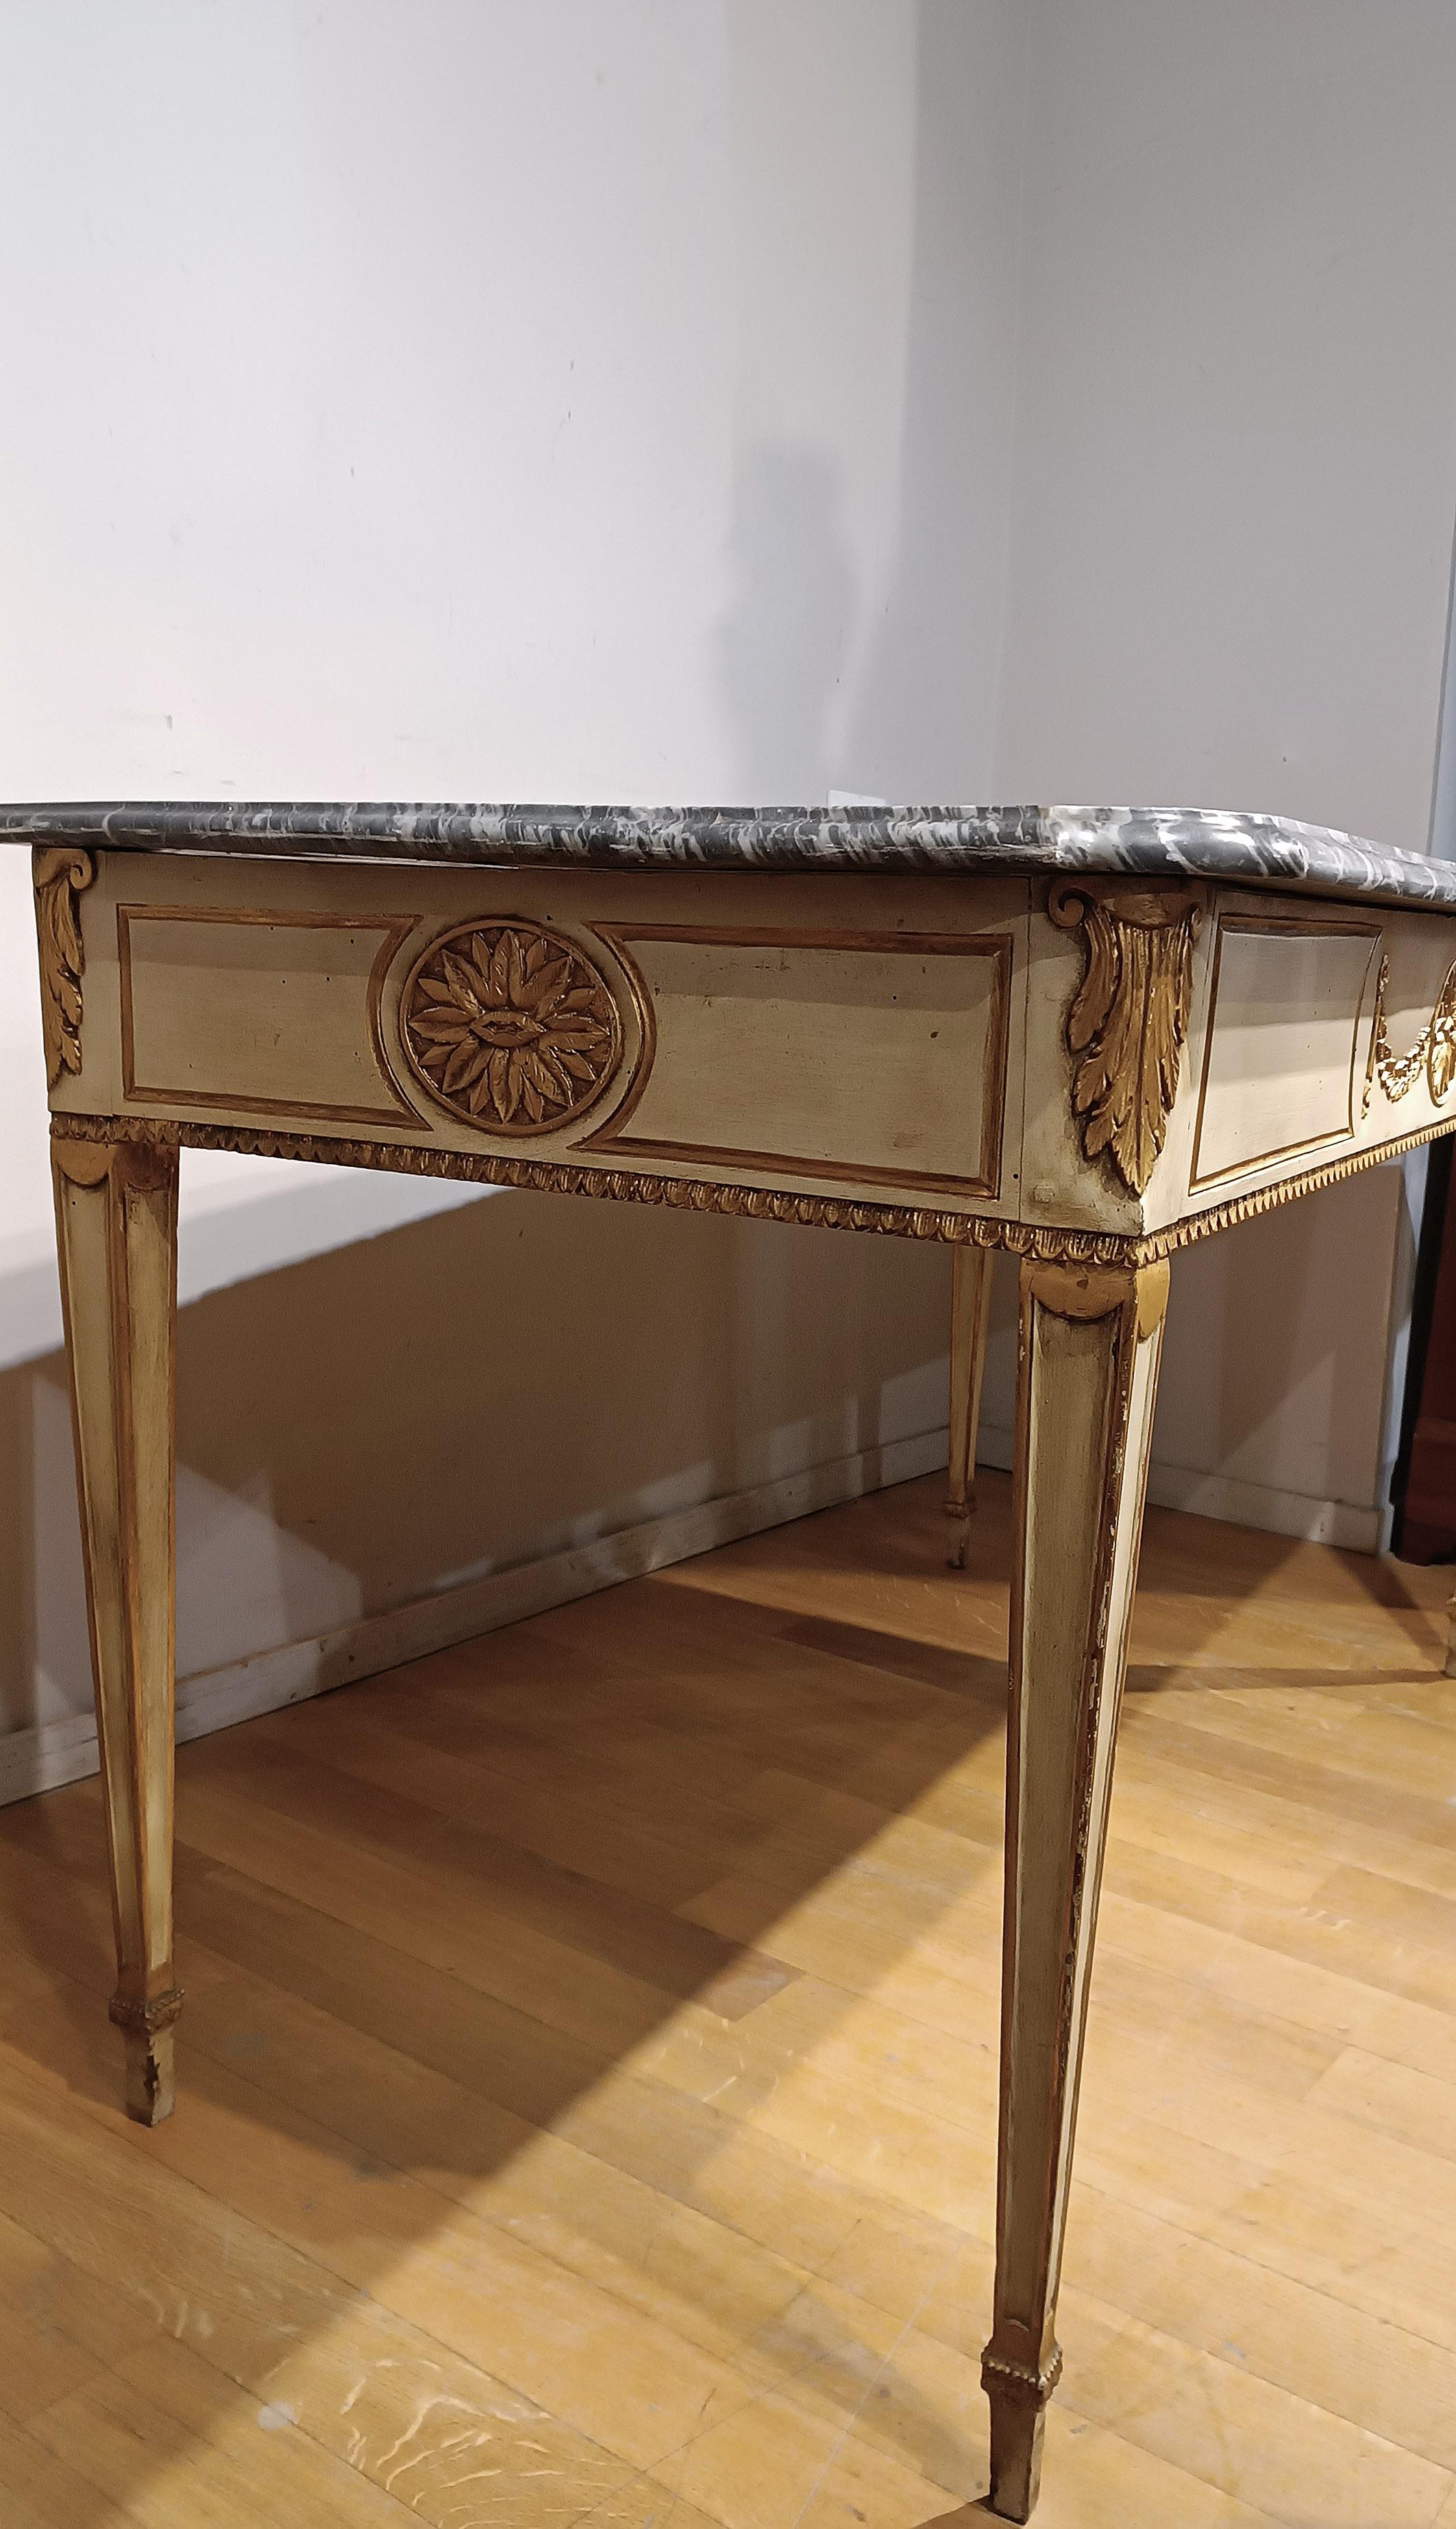 Hand-Painted END OF THE 18th CENTURY NEOCLASSICAL CONSOLLE WITH GRAY BARDIGLIO MARBLE For Sale